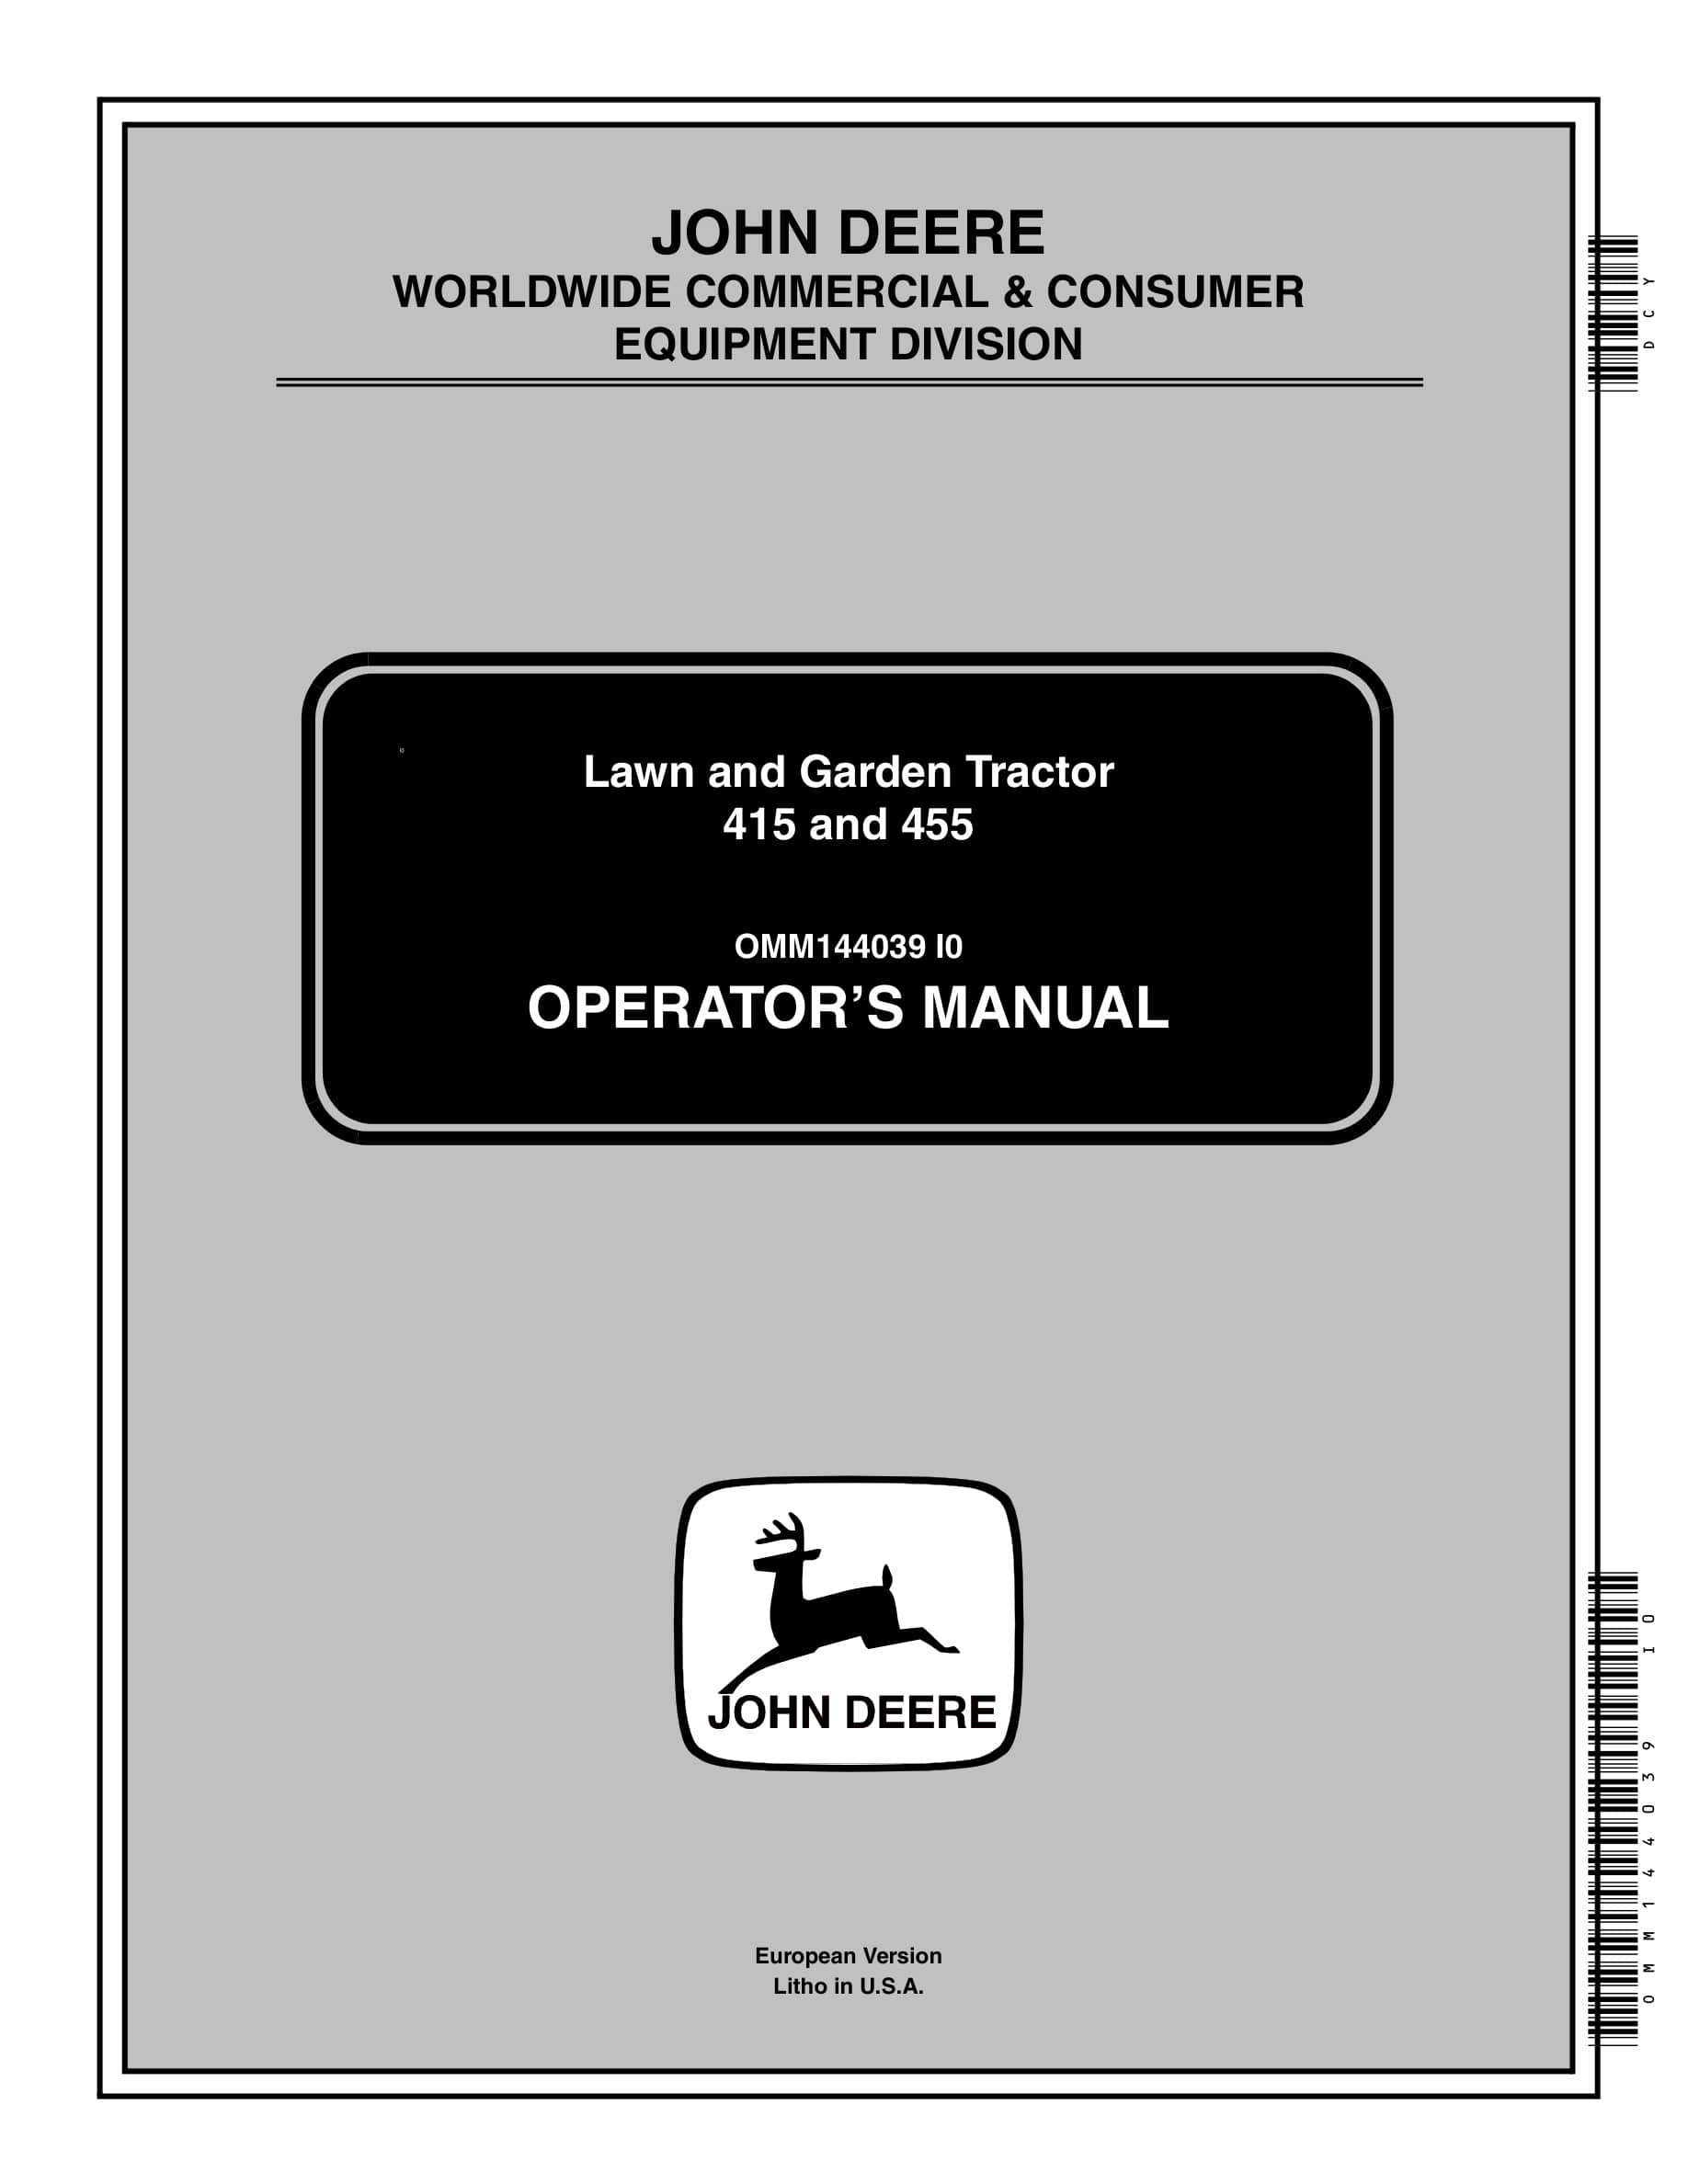 John Deere 415 And 455 Lawn And Garden Tractors Operator Manual OMM144039-1